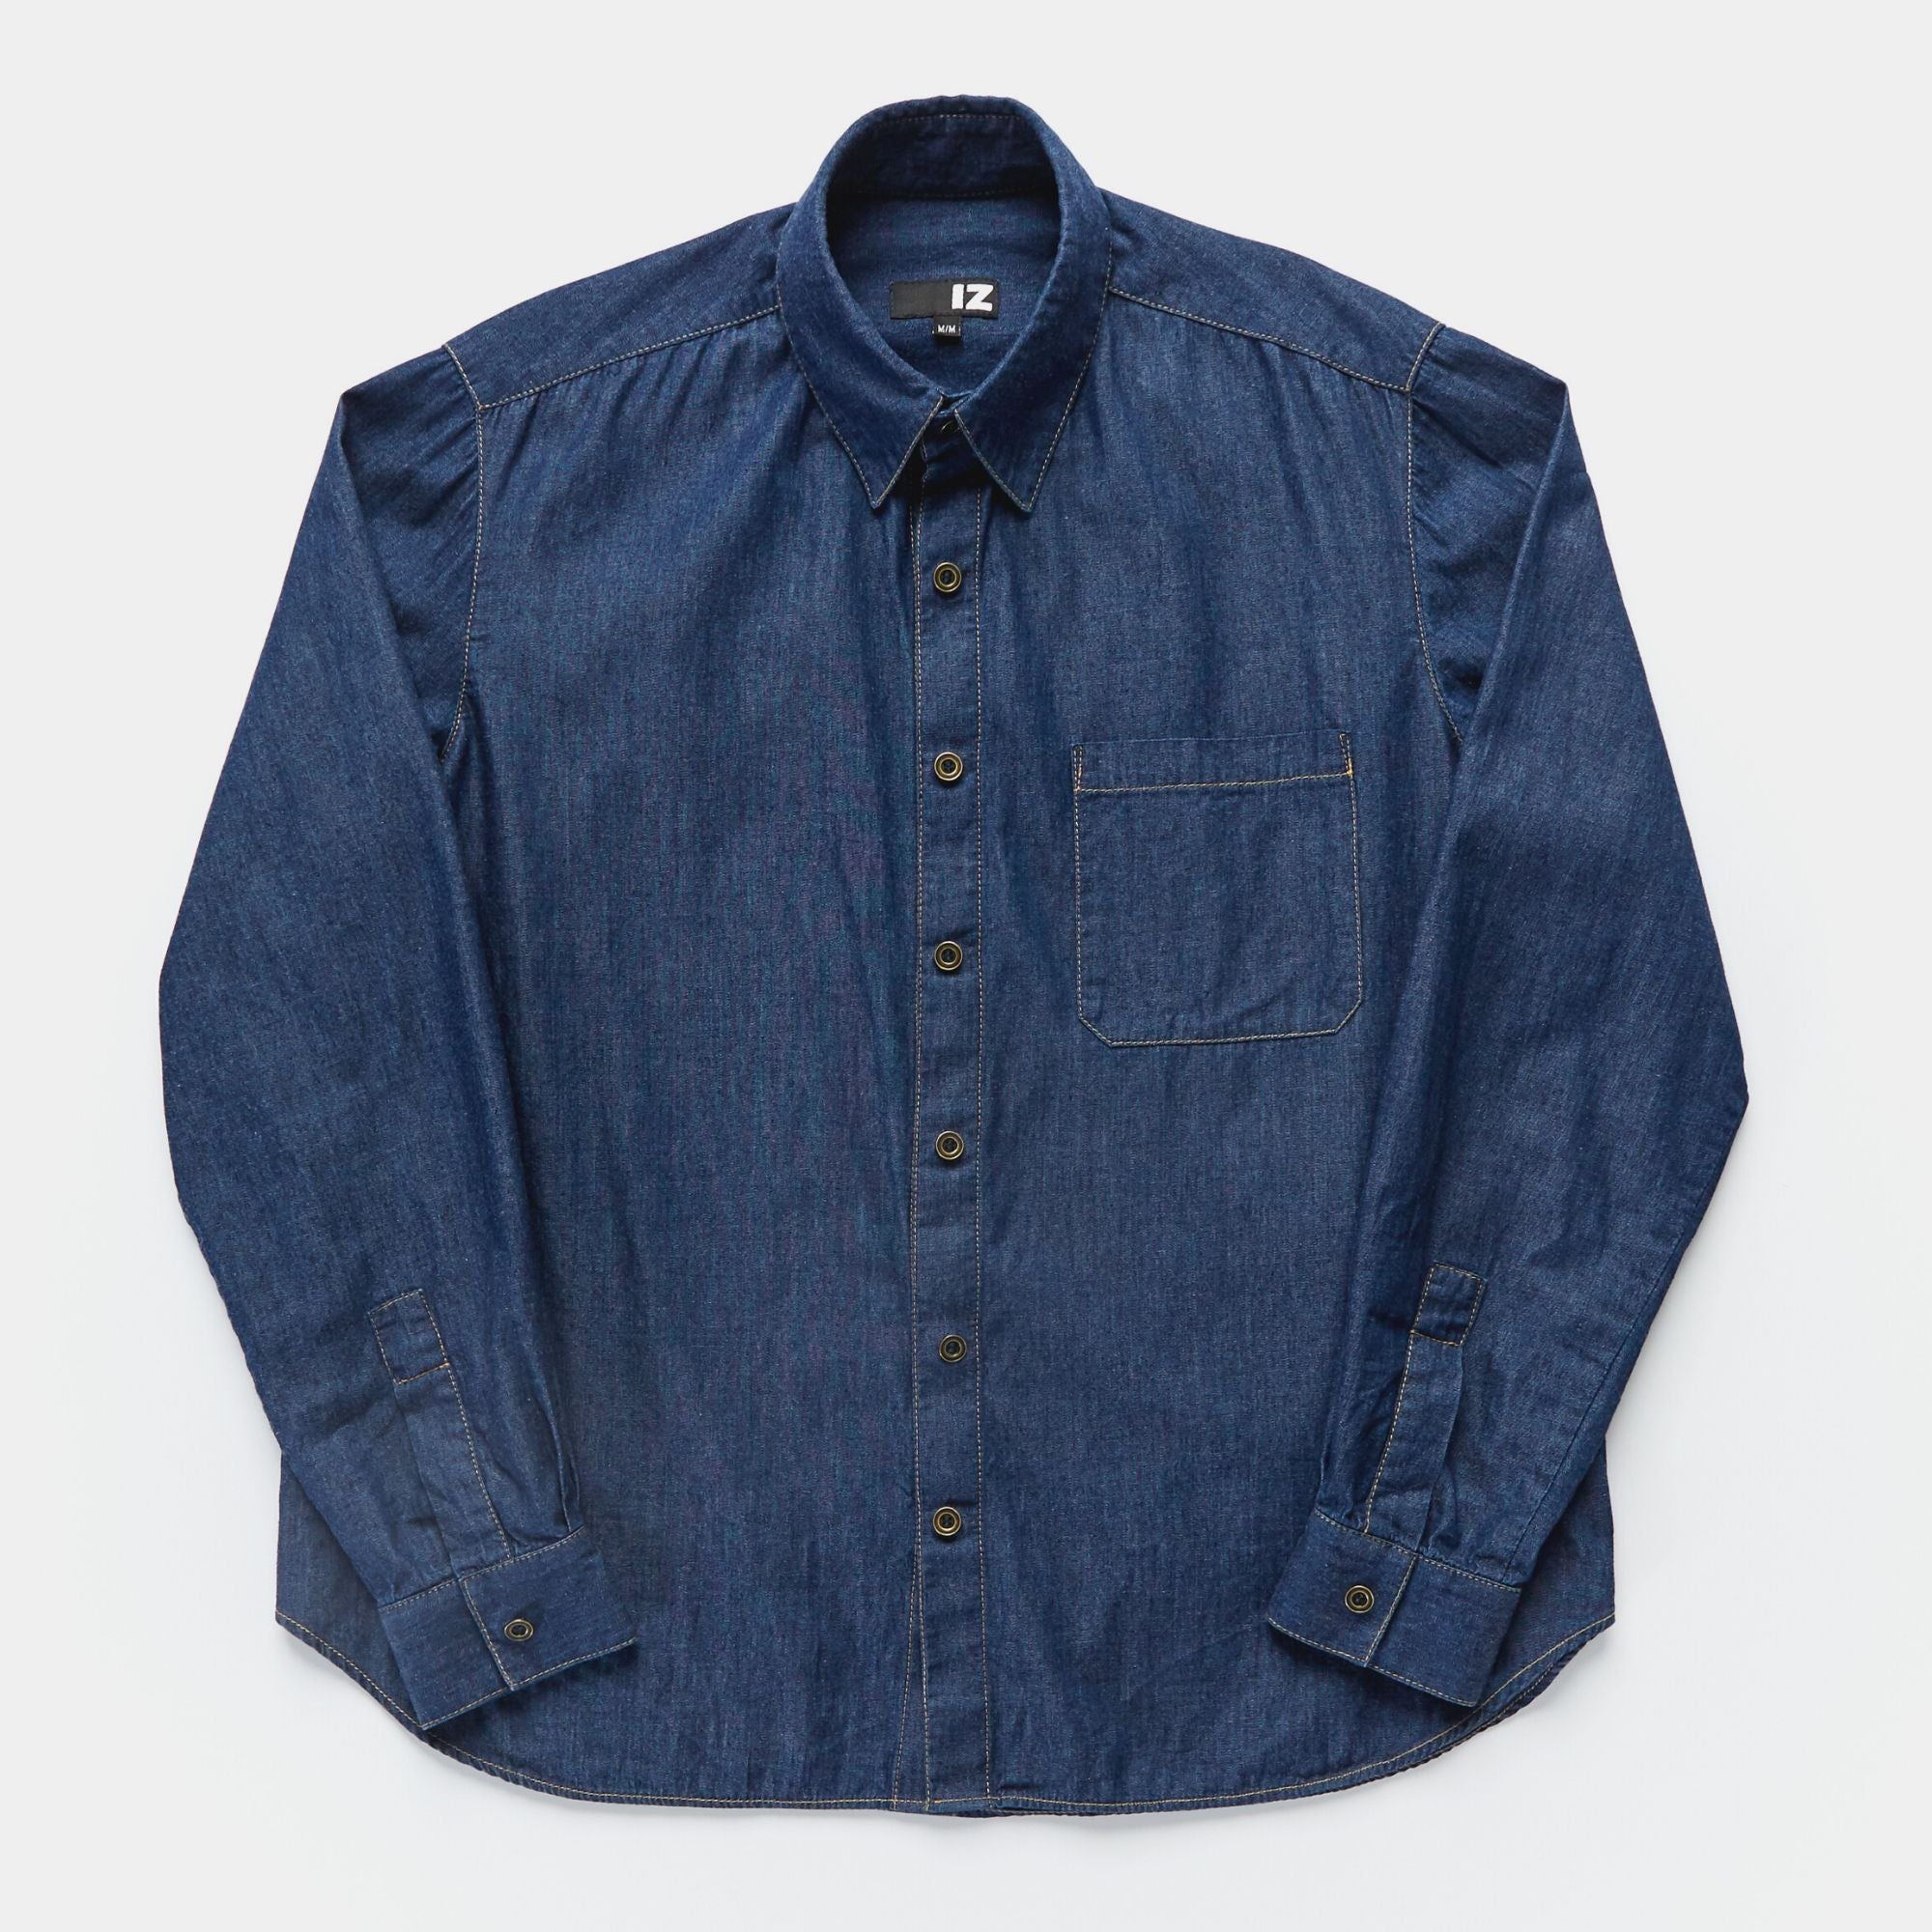 Classic Long Sleeve Denim Shirt with Magnetic Closures